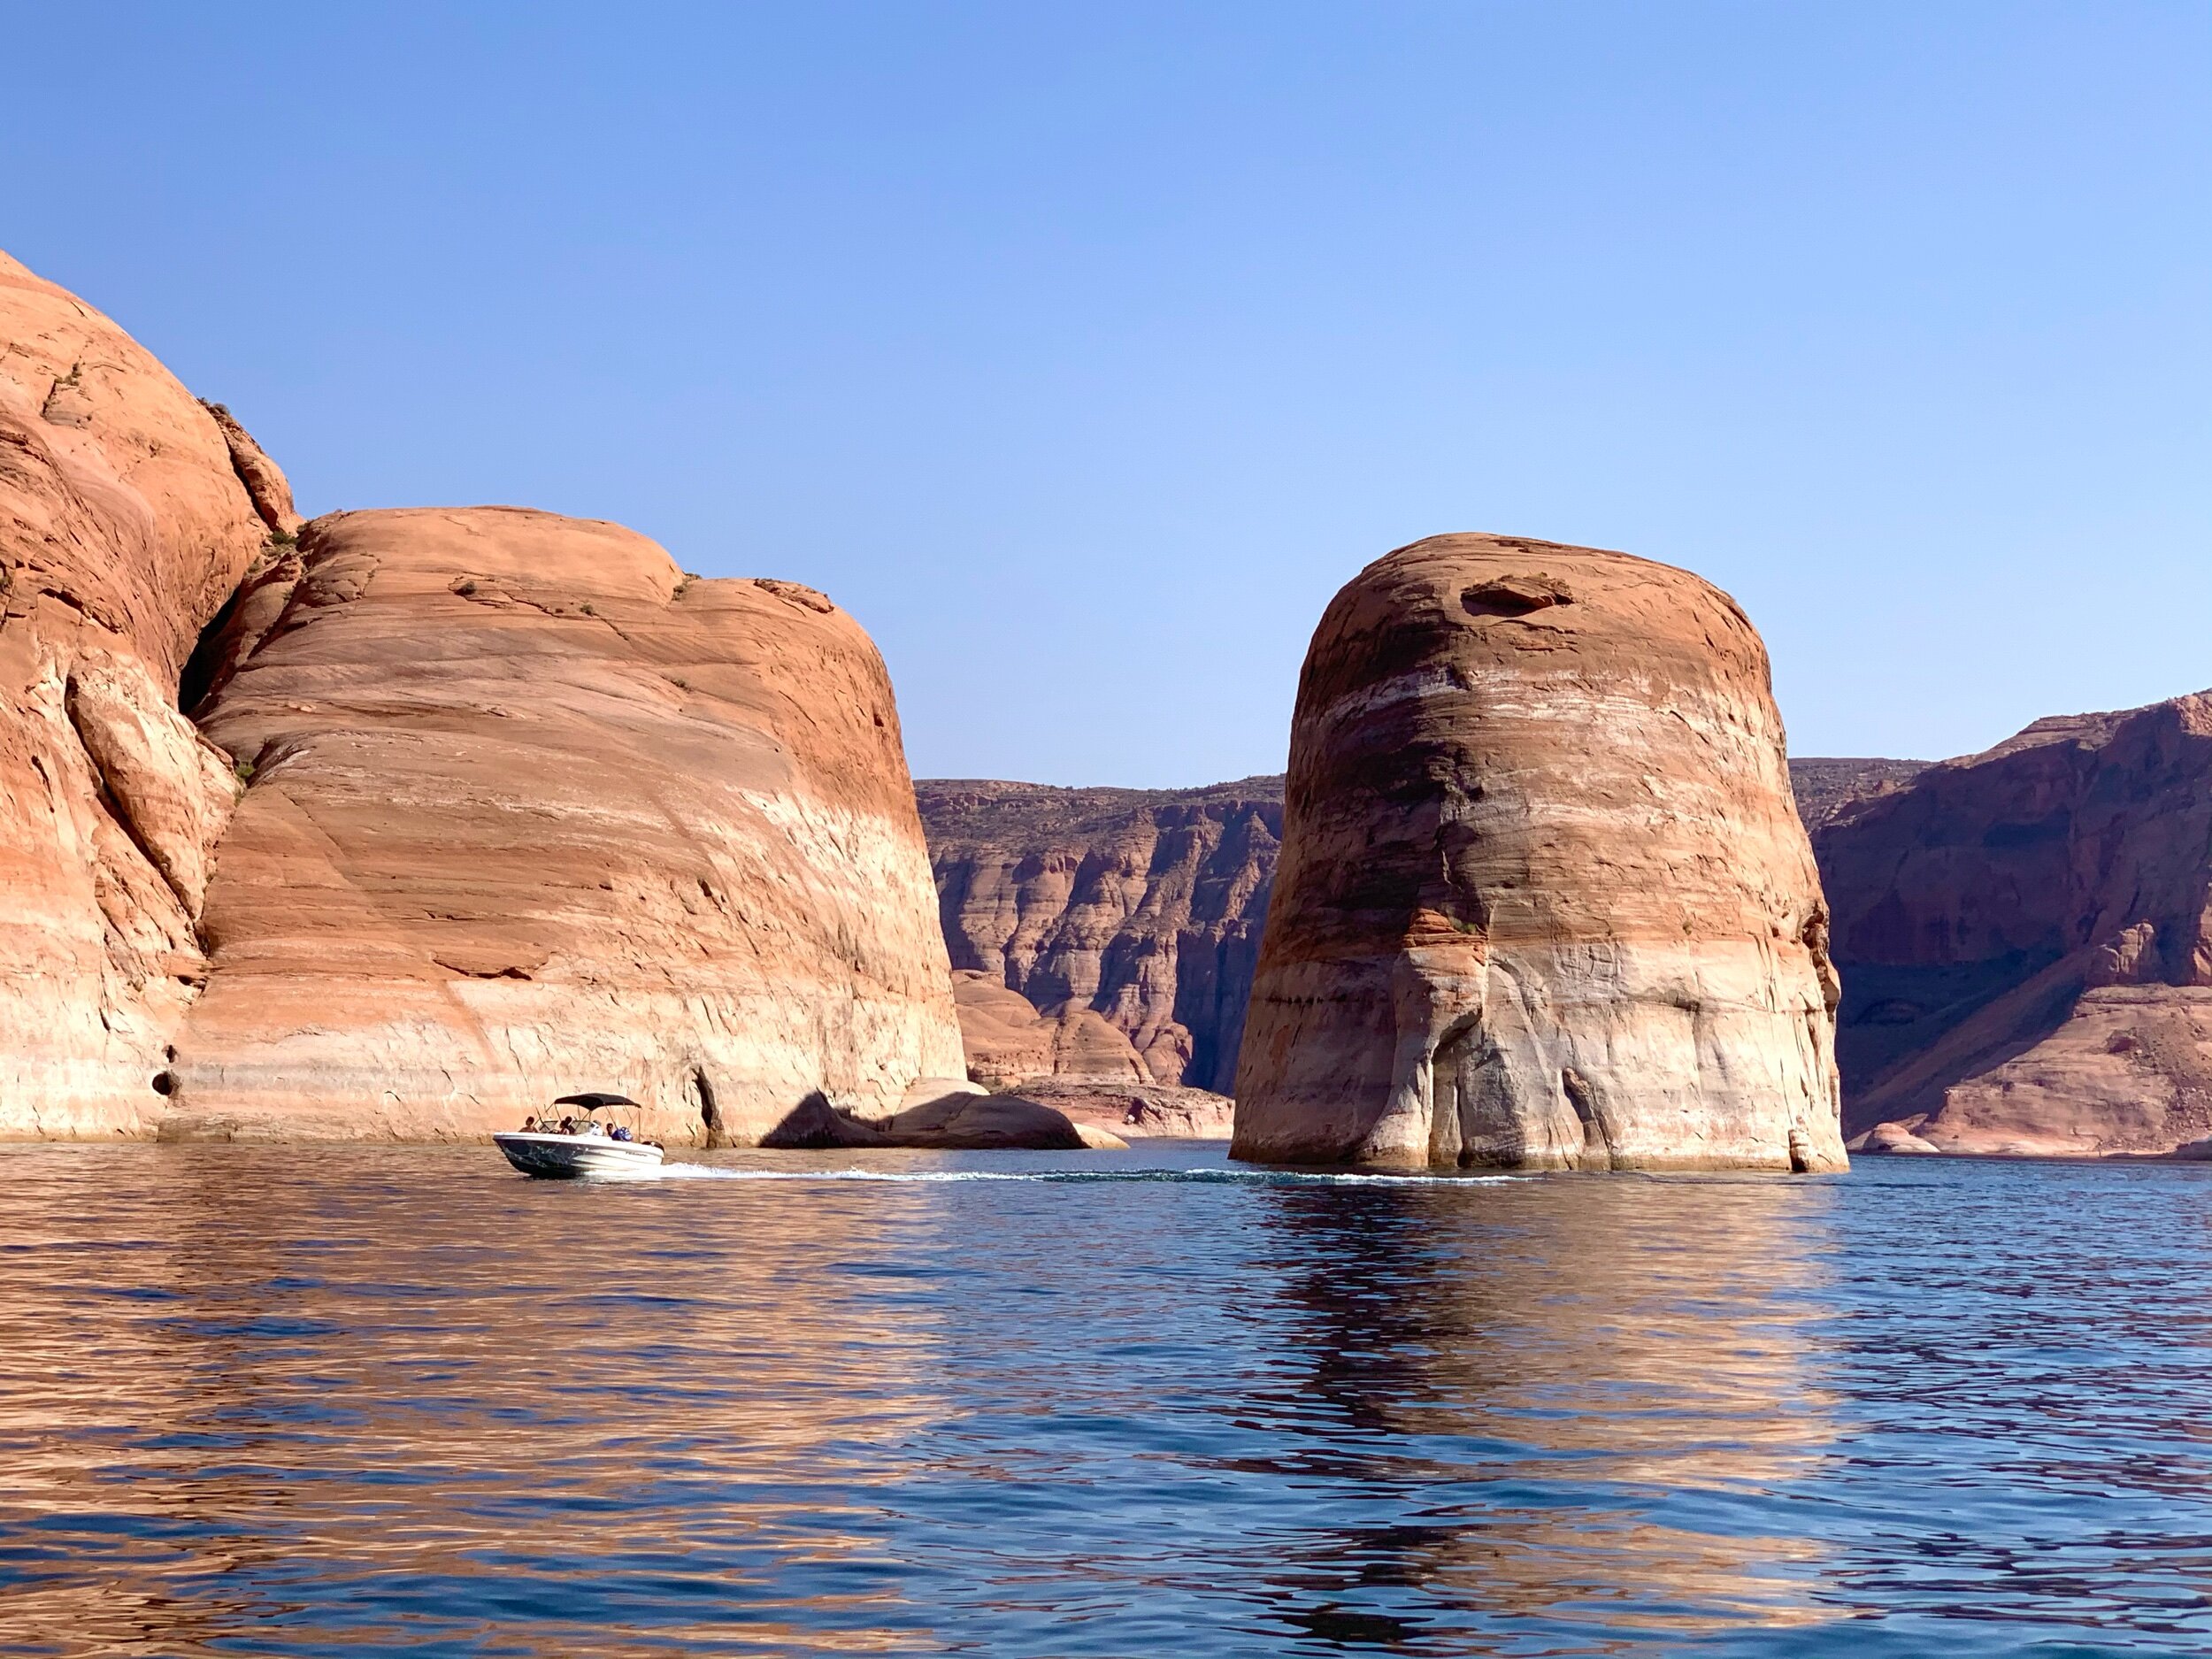   Lake Powell/Glen Canyon National Recreation Area  is a beautiful manmade reservoir on the Colorado River. 